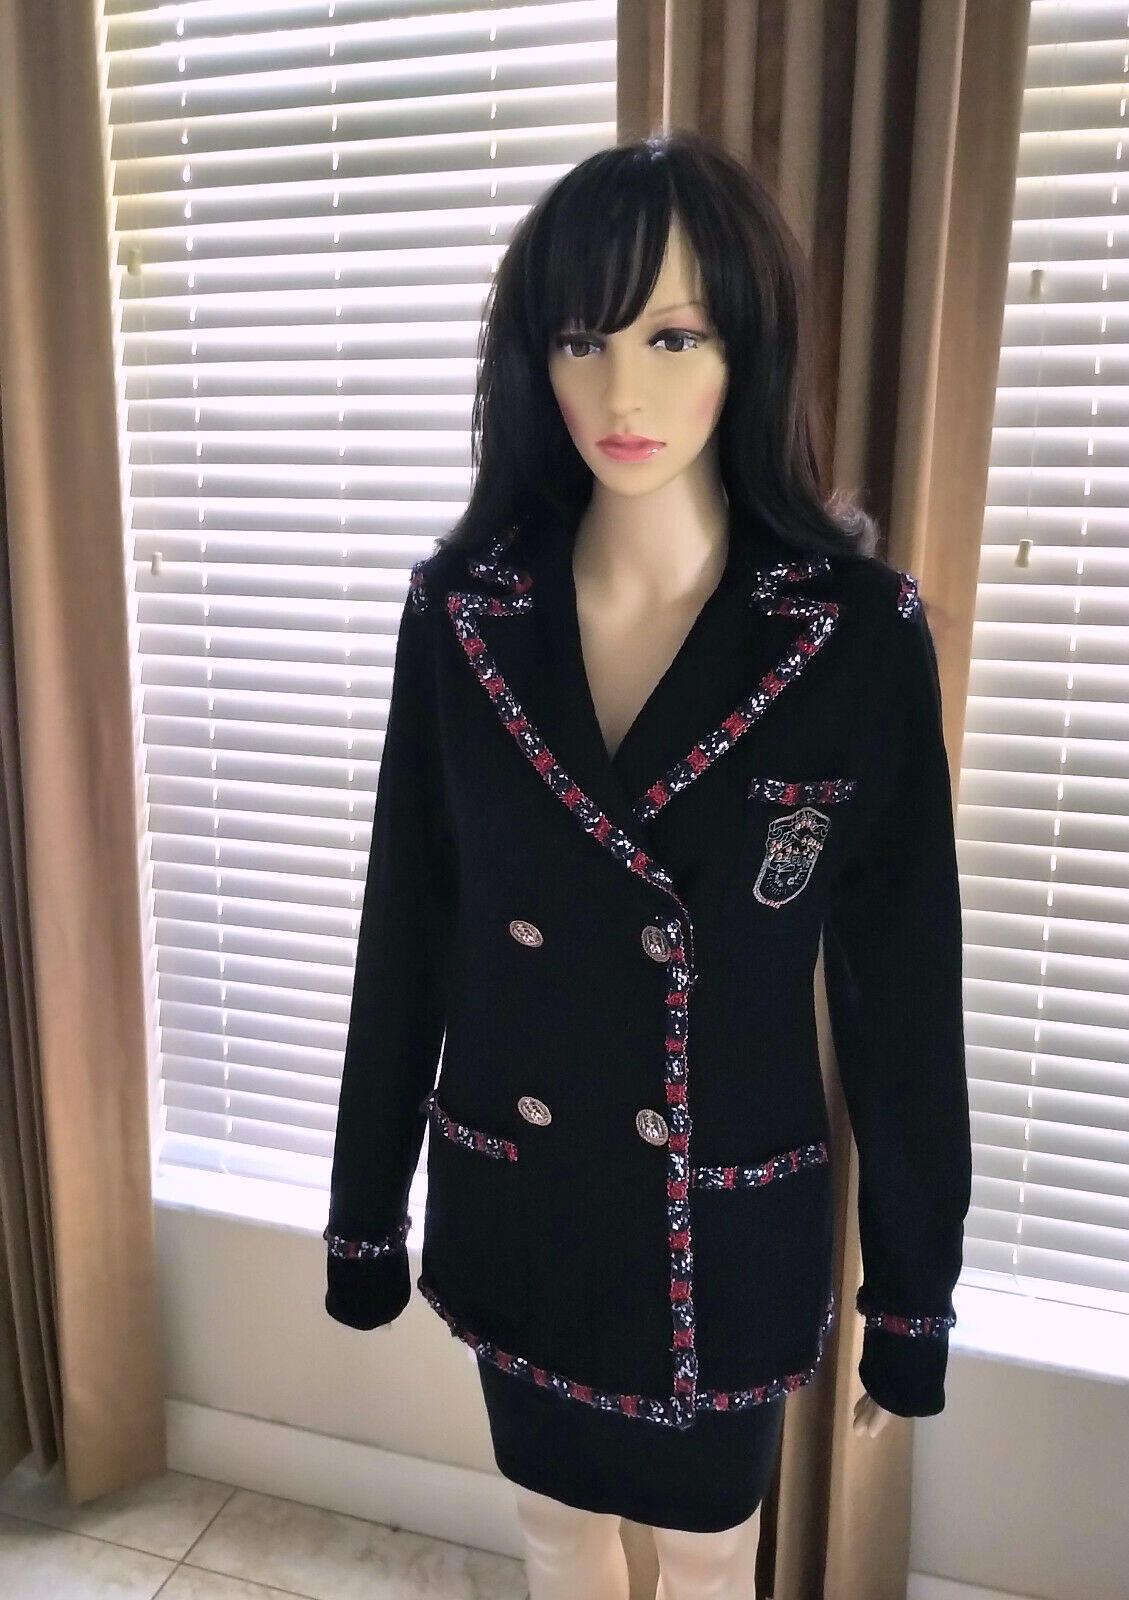 Chanel 2012 12A Paris-Bombay Black & Red Beaded Crest Patch Jacket FR 38/ US 4 6 For Sale 5